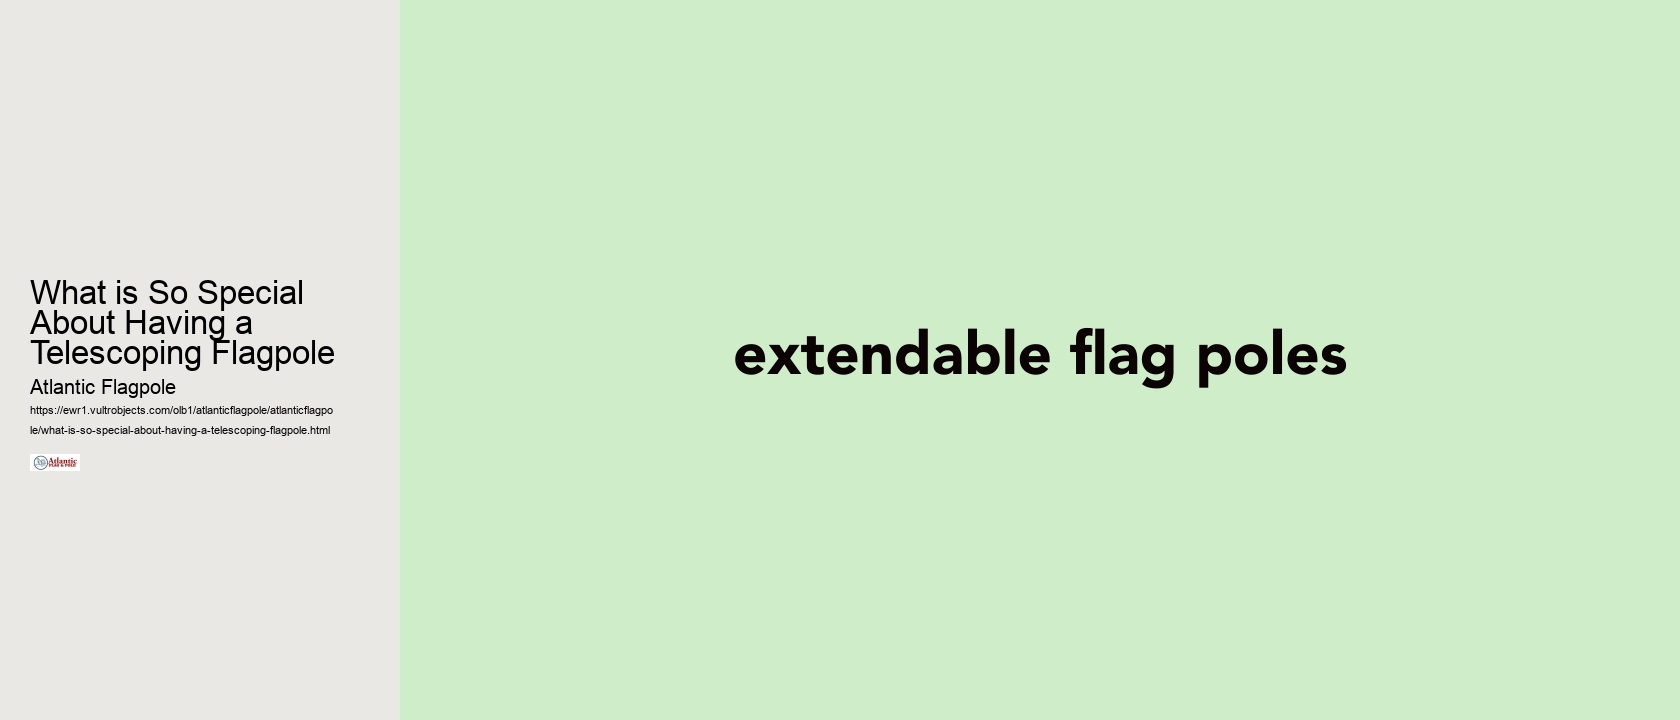 What is So Special About Having a Telescoping Flagpole